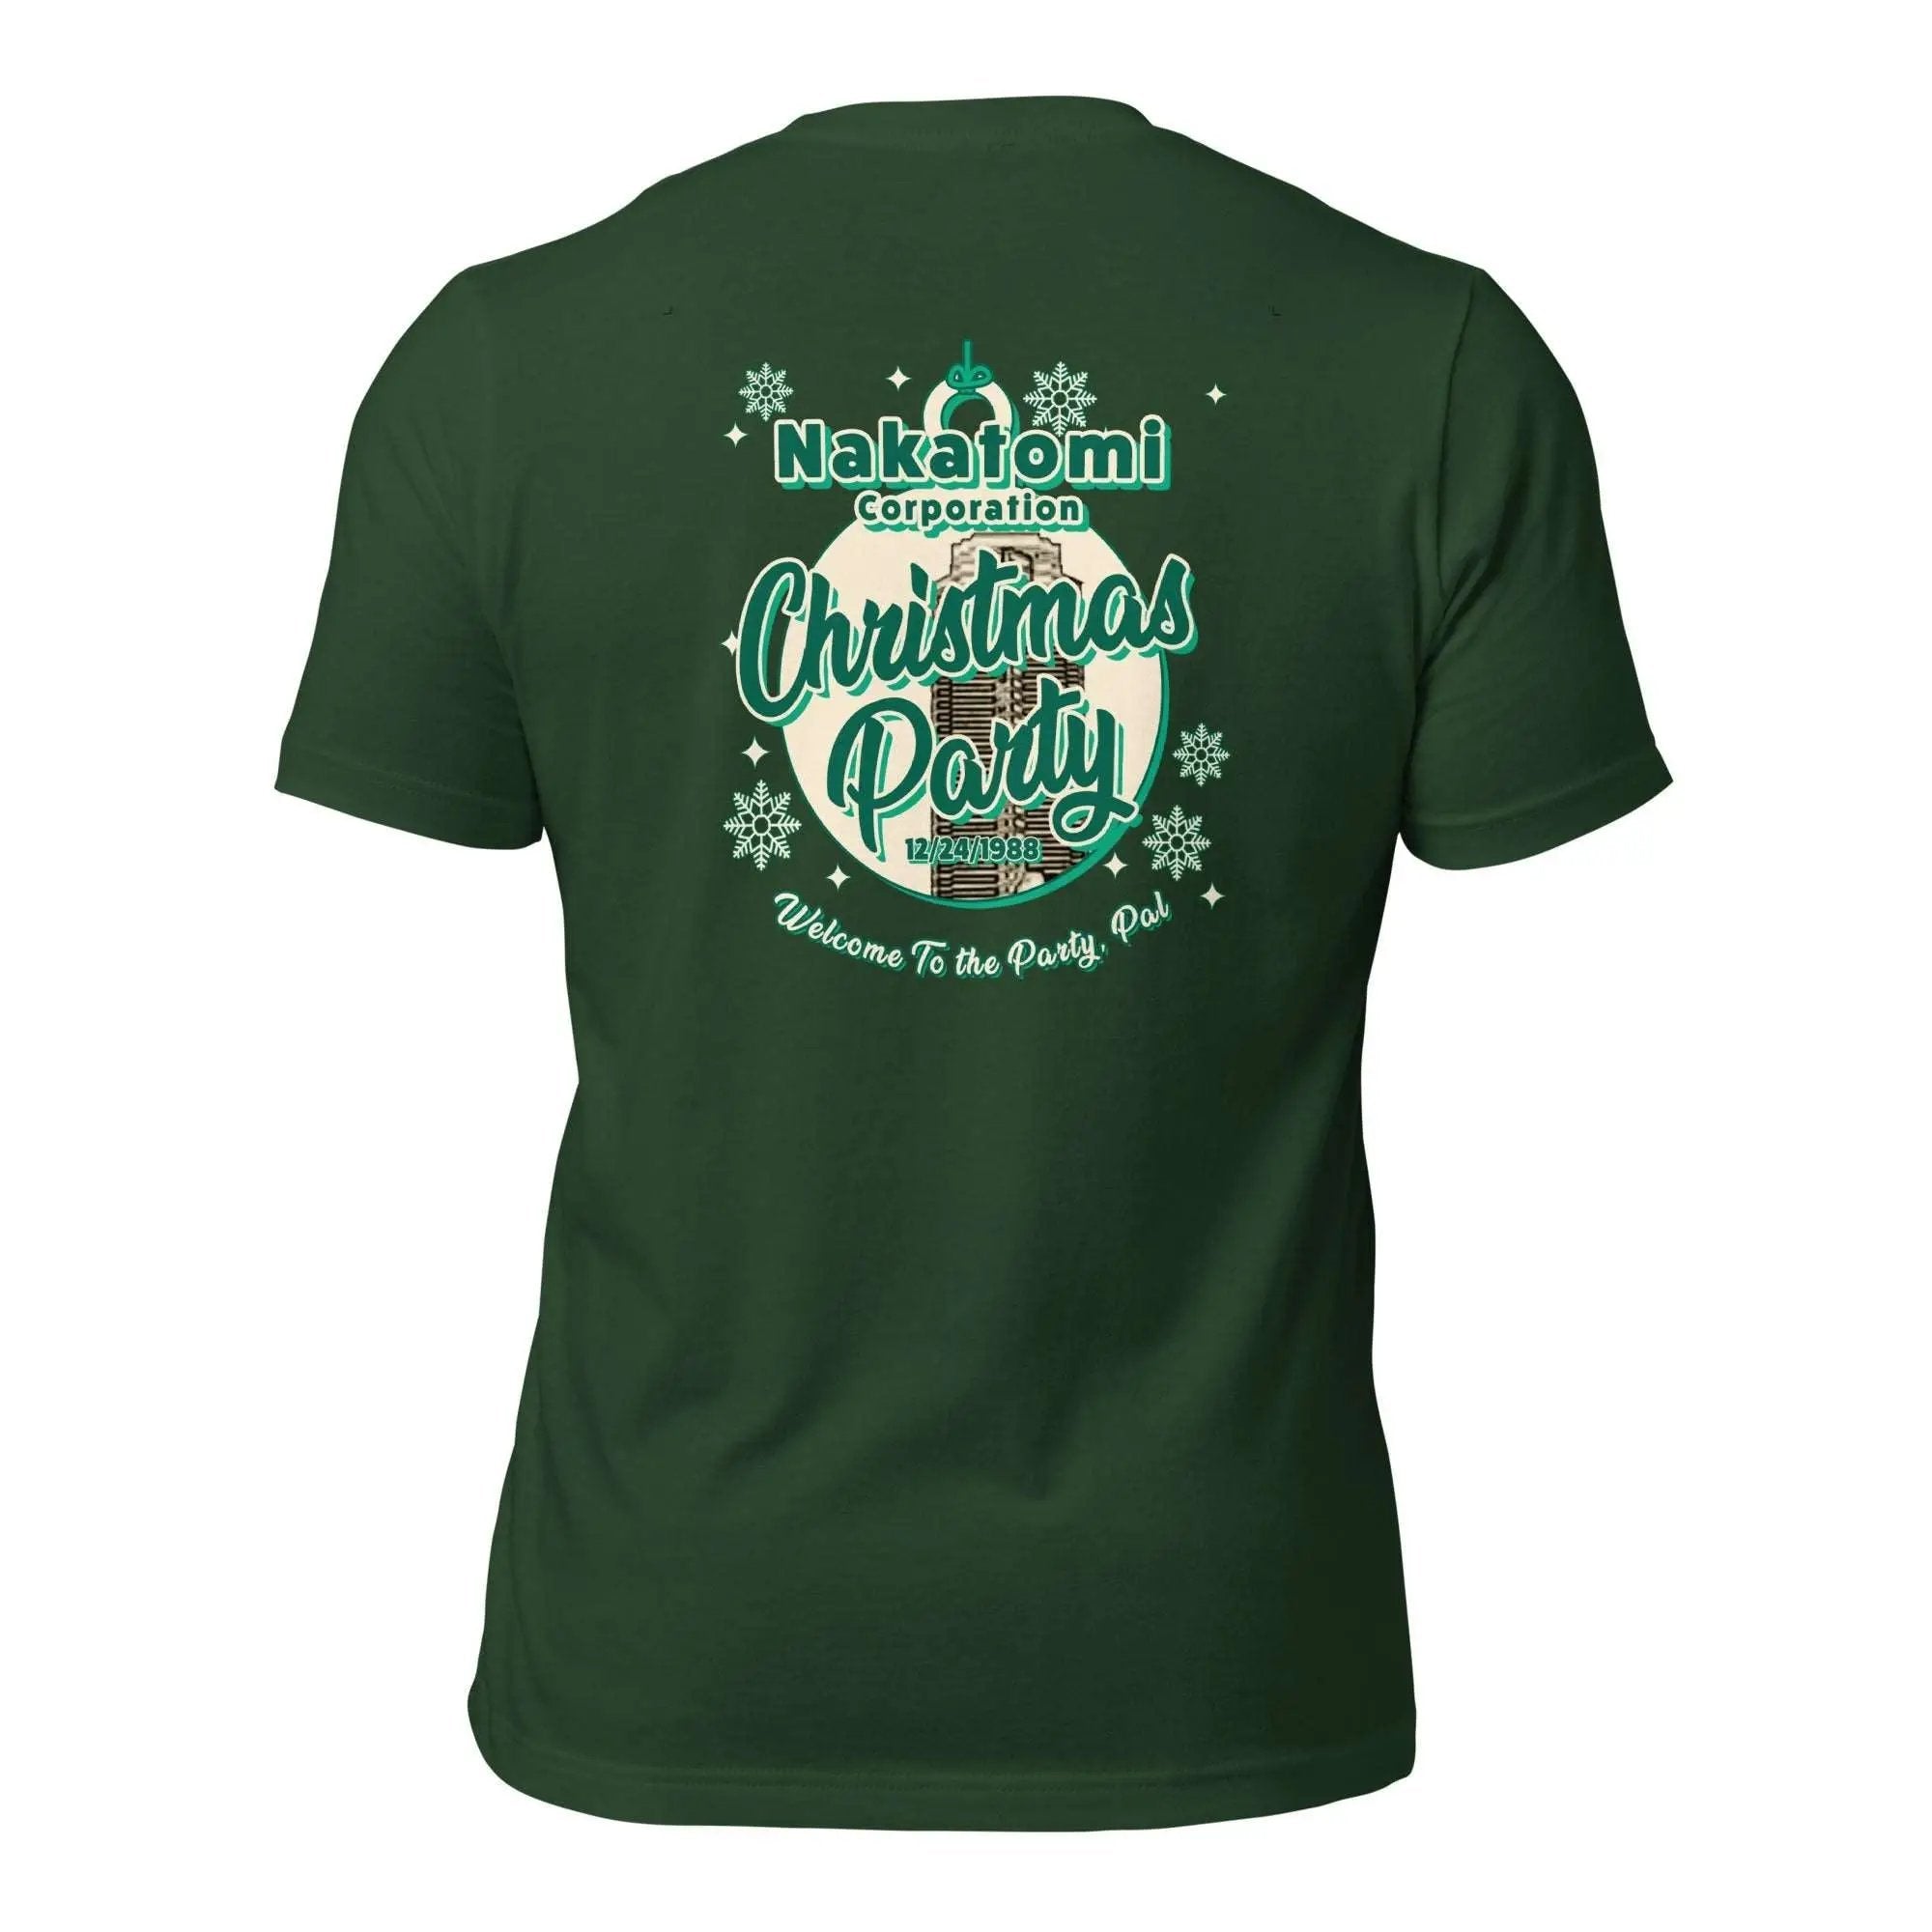 a green t - shirt with a christmas message on it